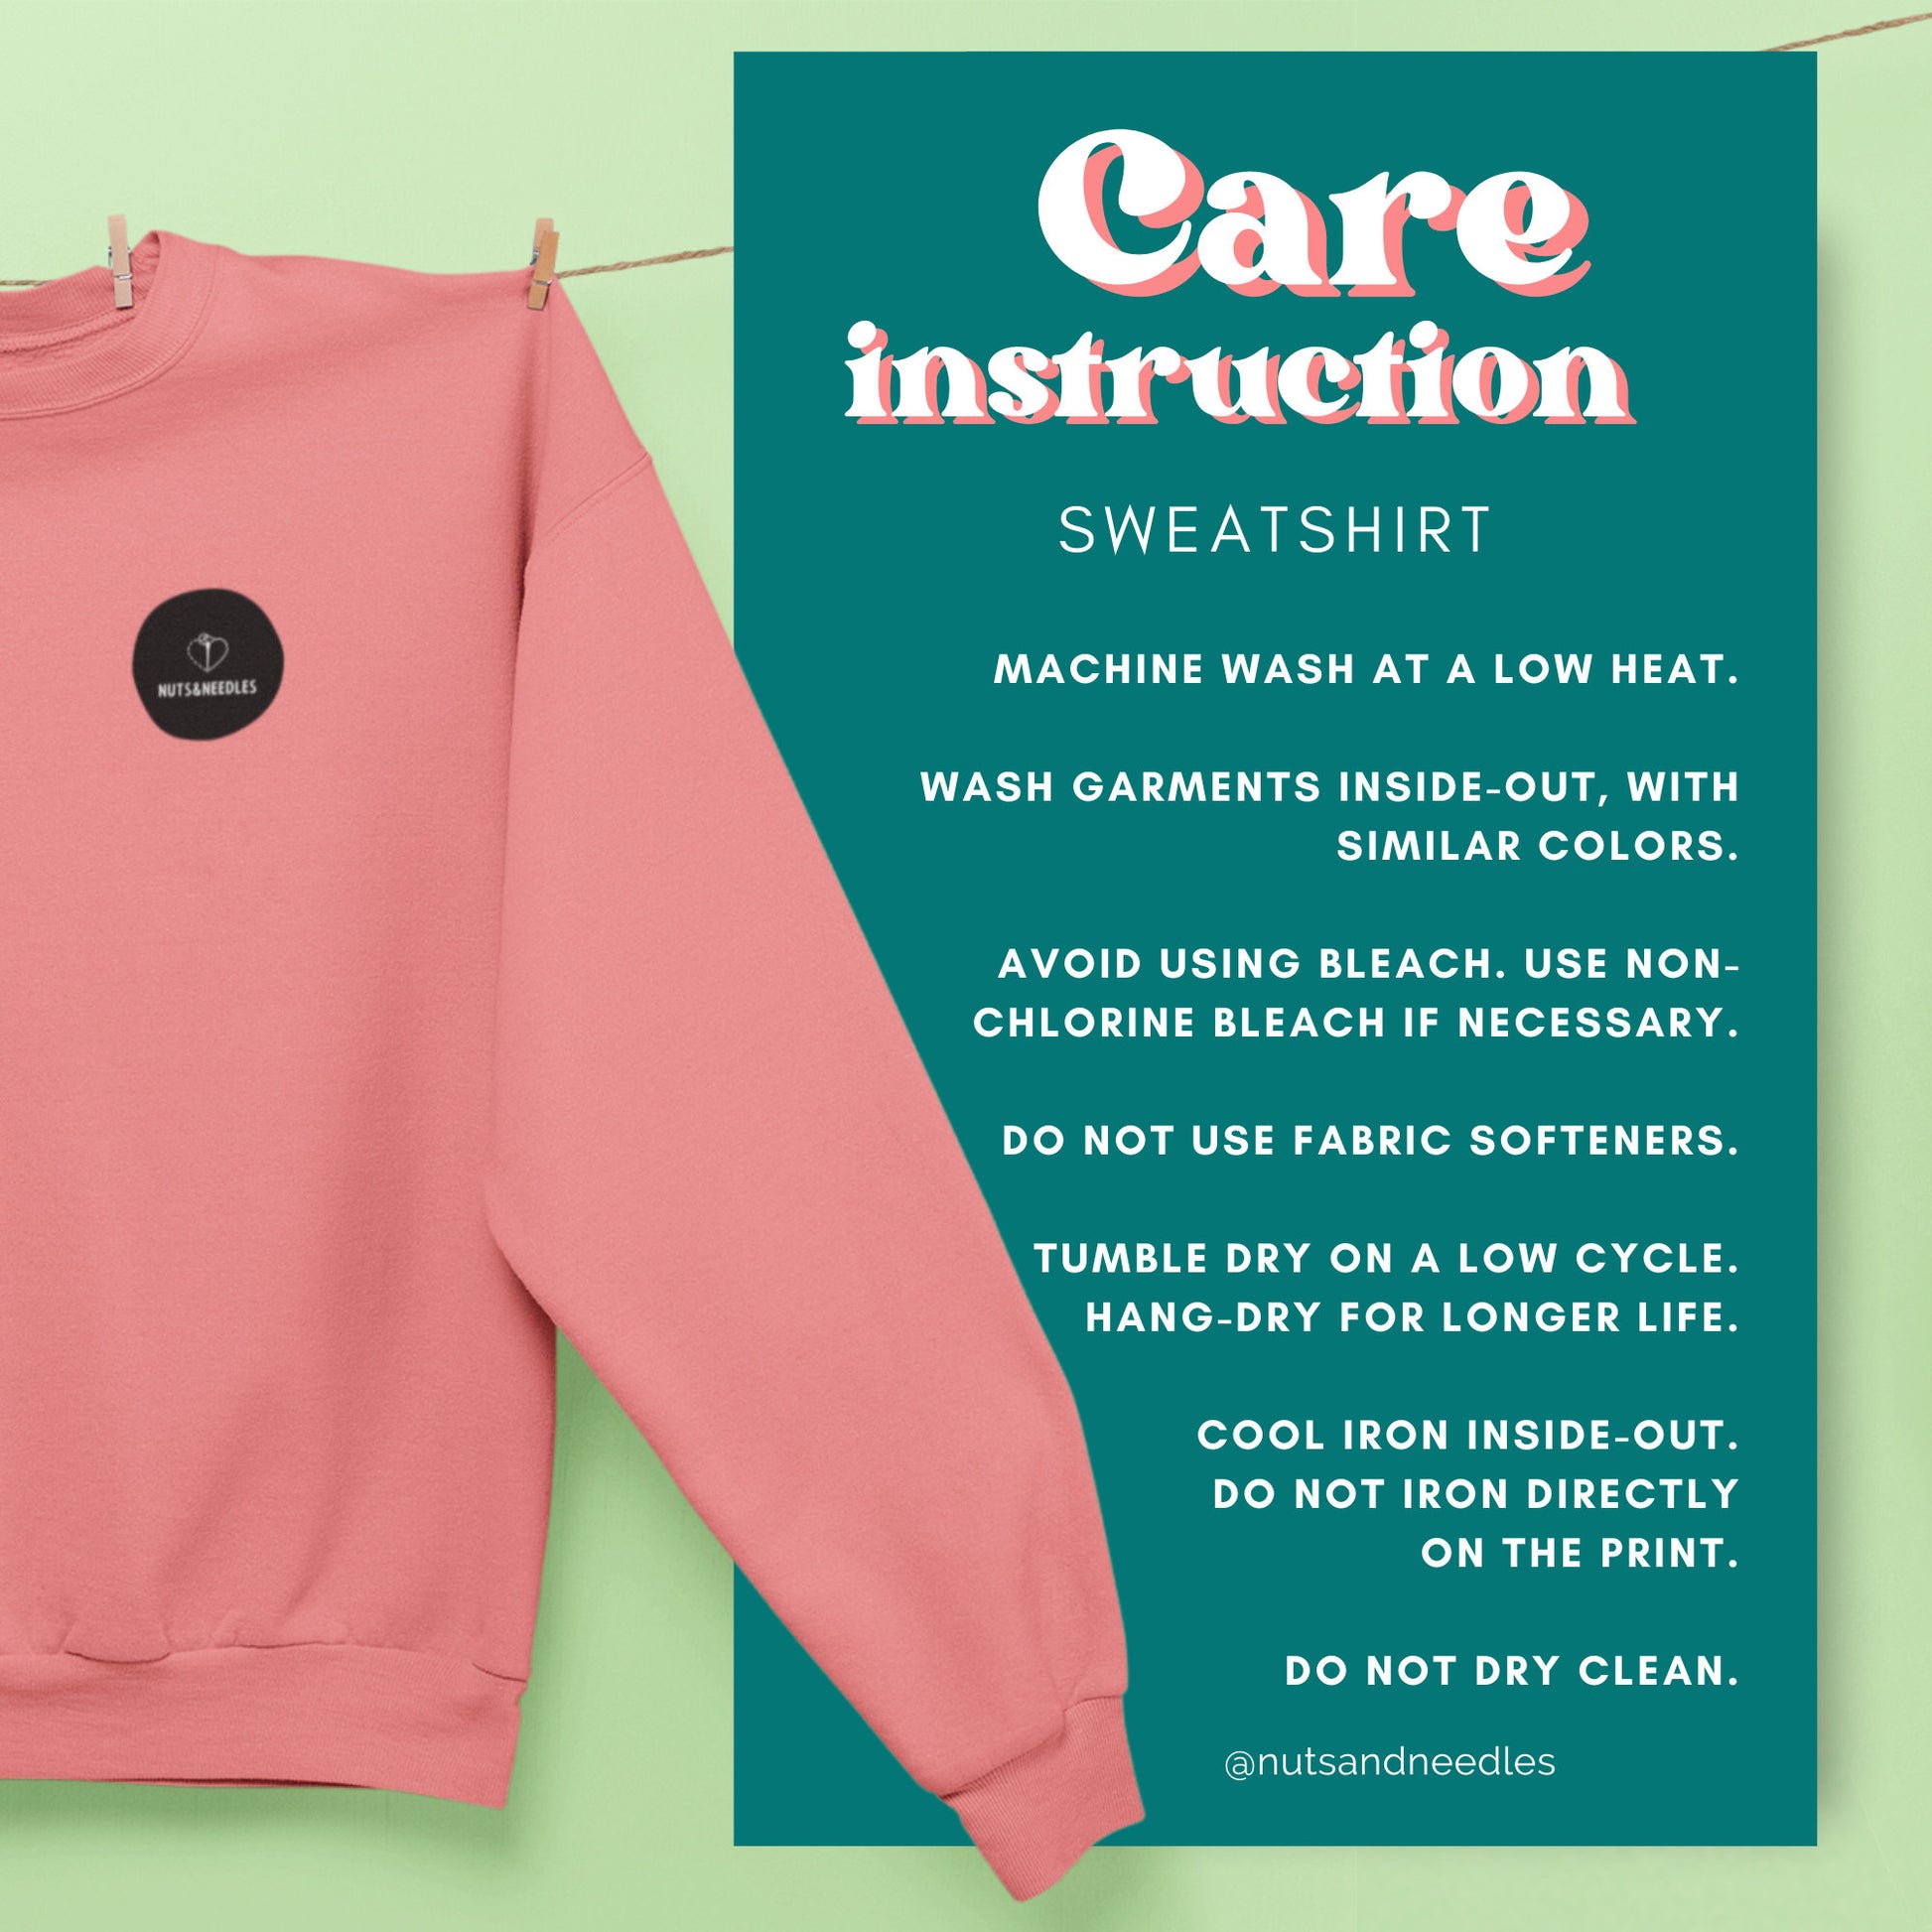 Mental Health Sweatshirt 'Self Love Candy', Valentines Day, Self Love, Self Care, Part of Profit donated to charity, Valentines Gift